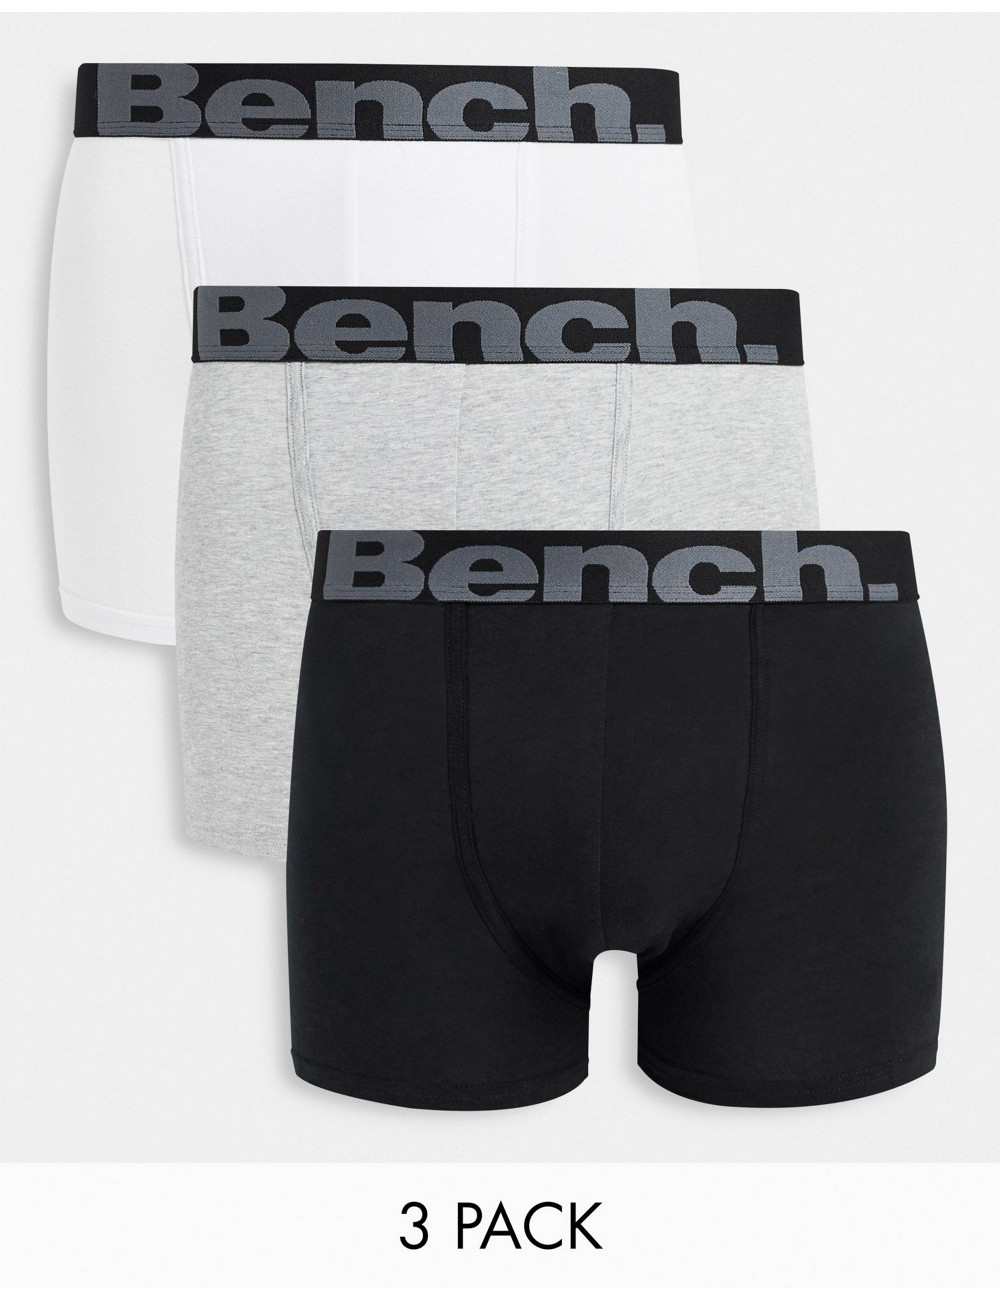 Bench Conan 3 pack boxers...